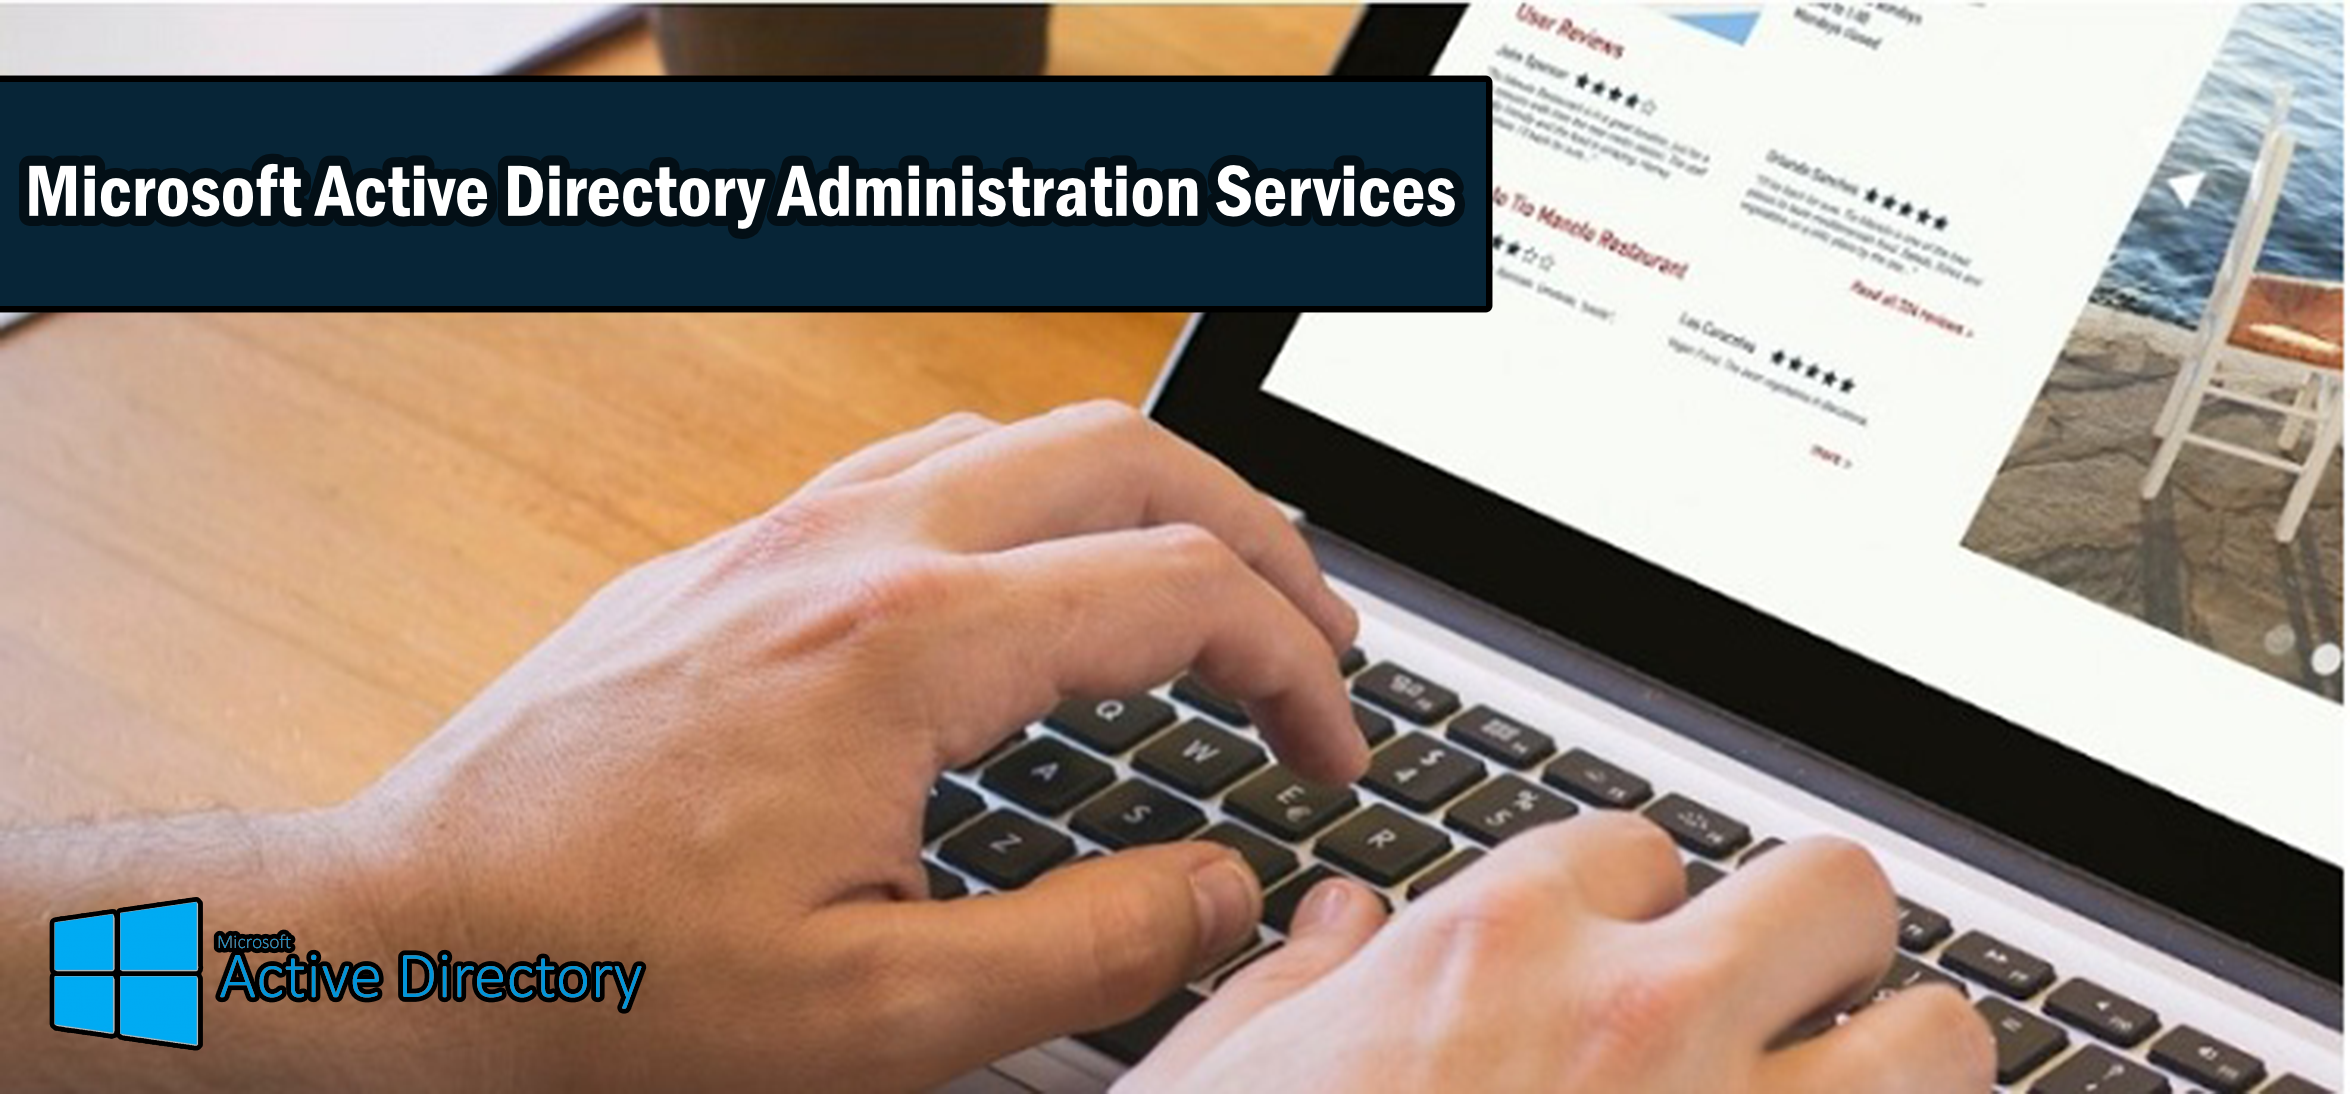 Microsoft Active Directory Administration Services